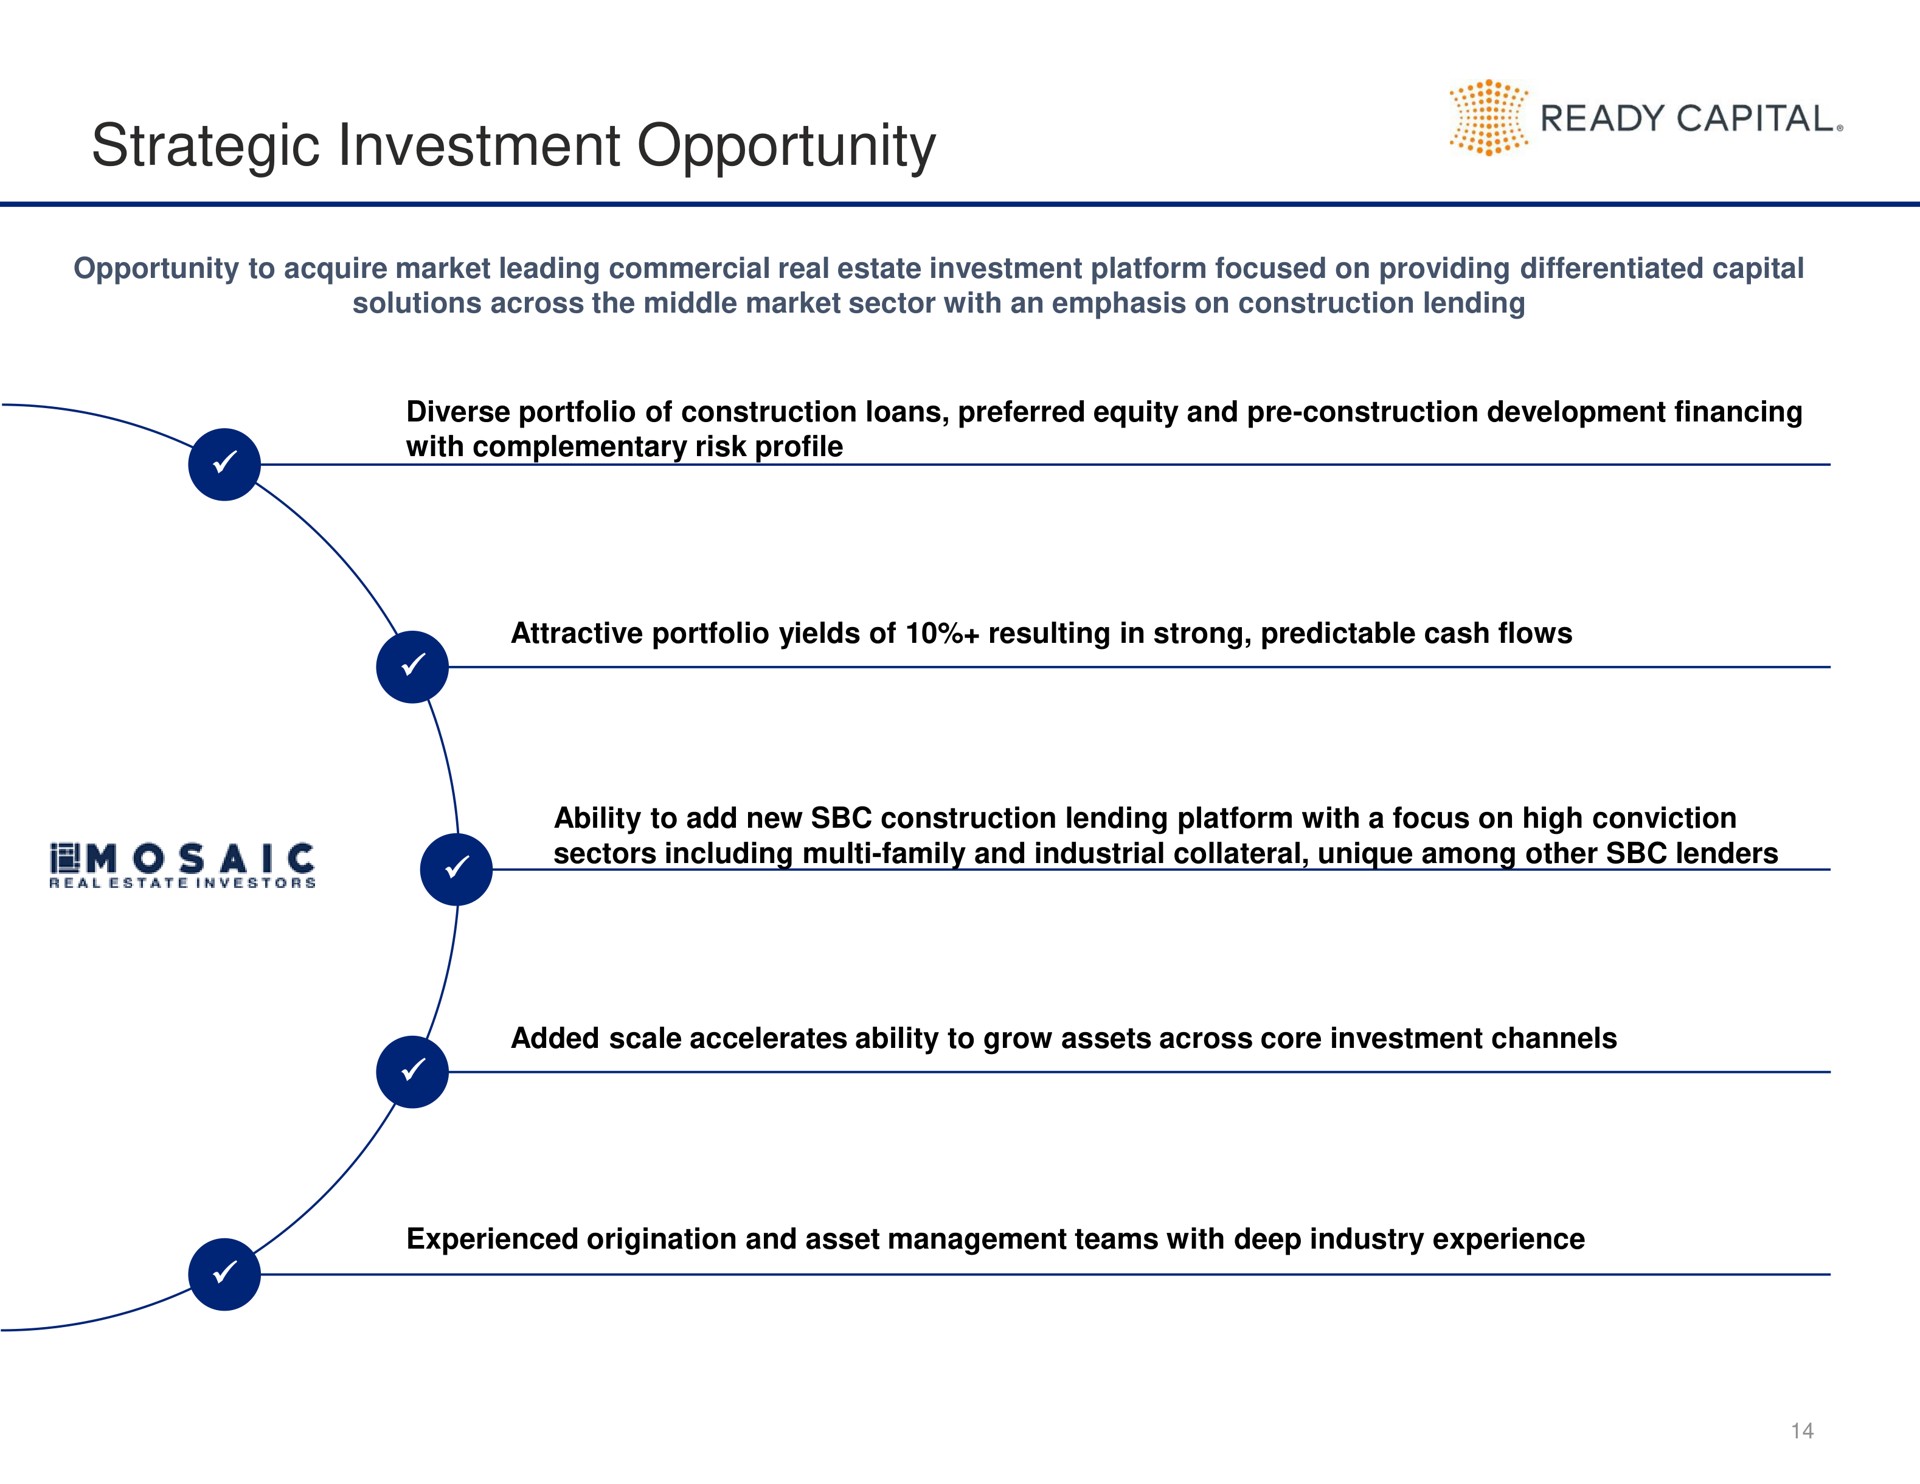 strategic investment opportunity seen | Ready Capital